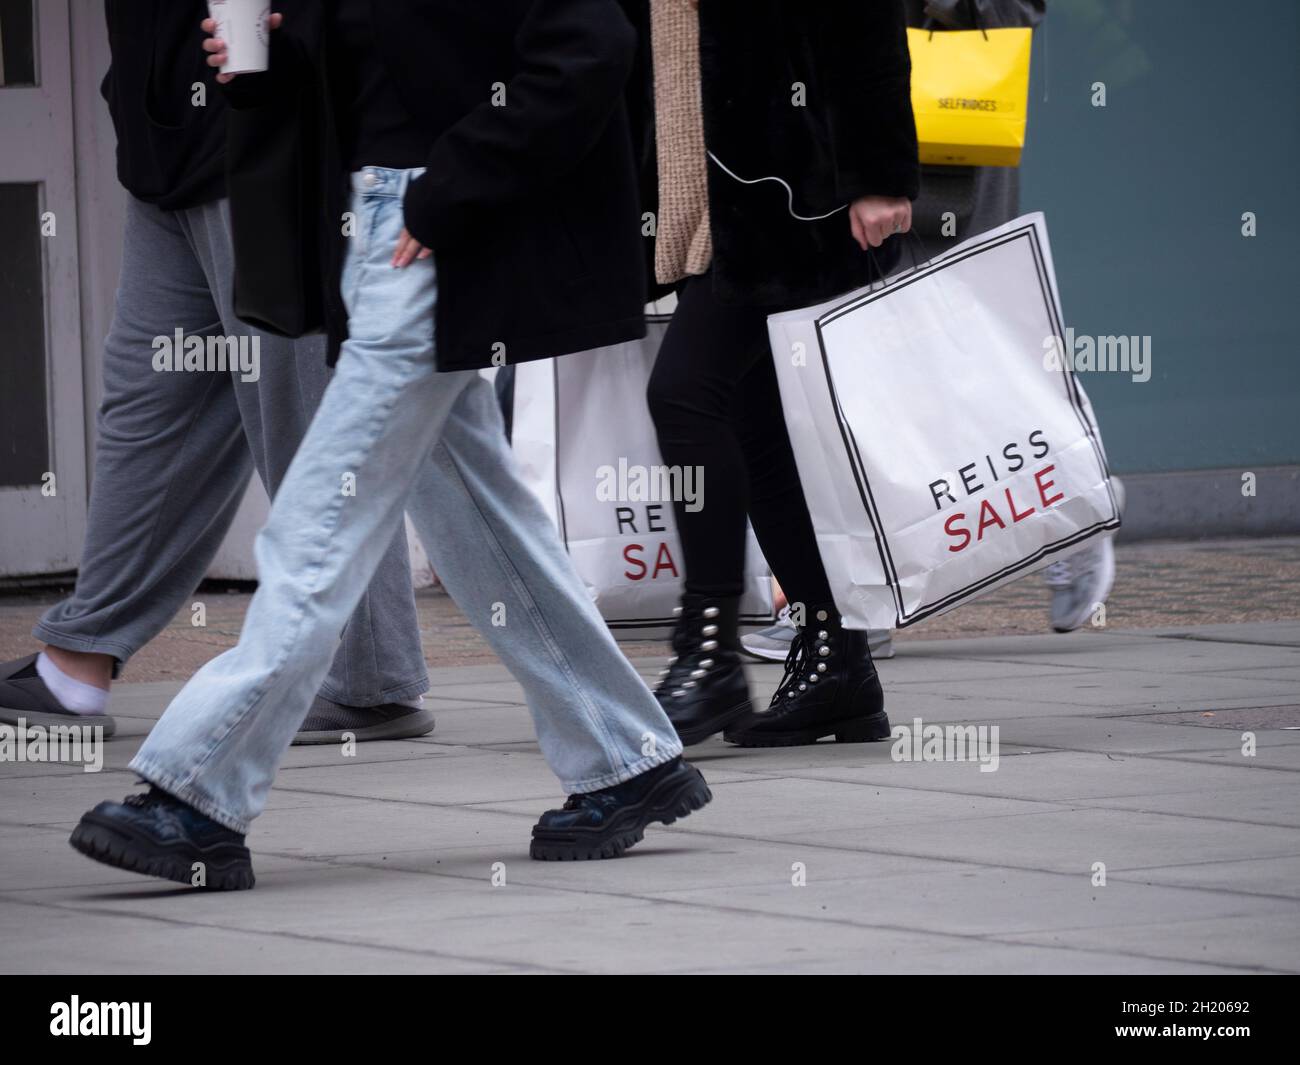 Rich poor divide inequality, Oxford Street London shopper holding a Reiss sale bag Reiss is aBritish fashion brand and retail store chain Stock Photo